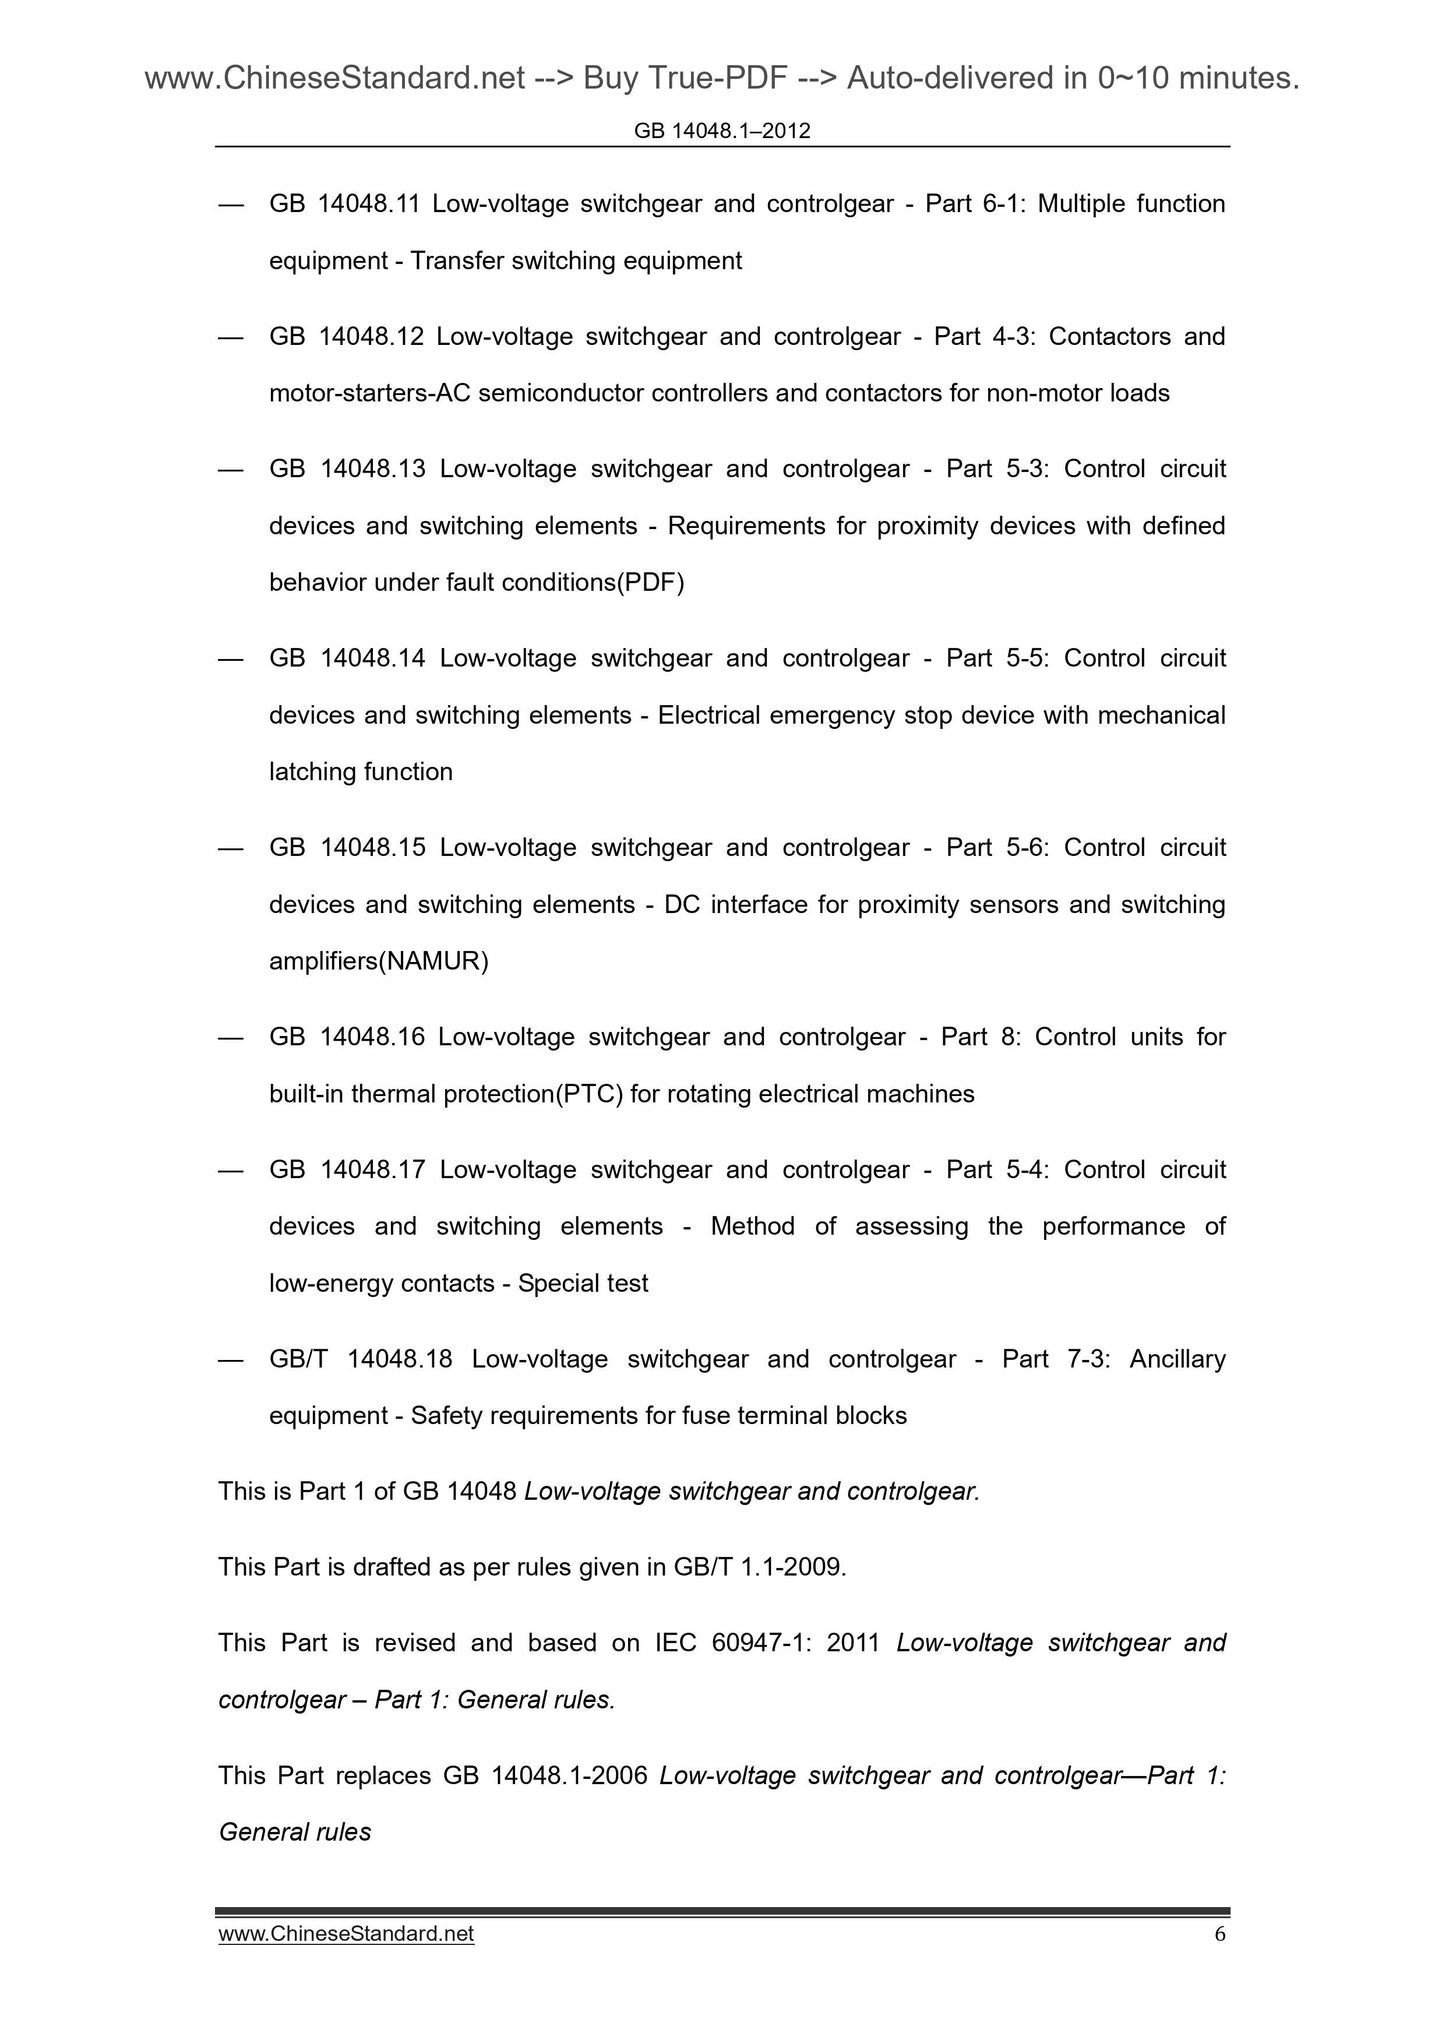 GB 14048.1-2012 Page 6